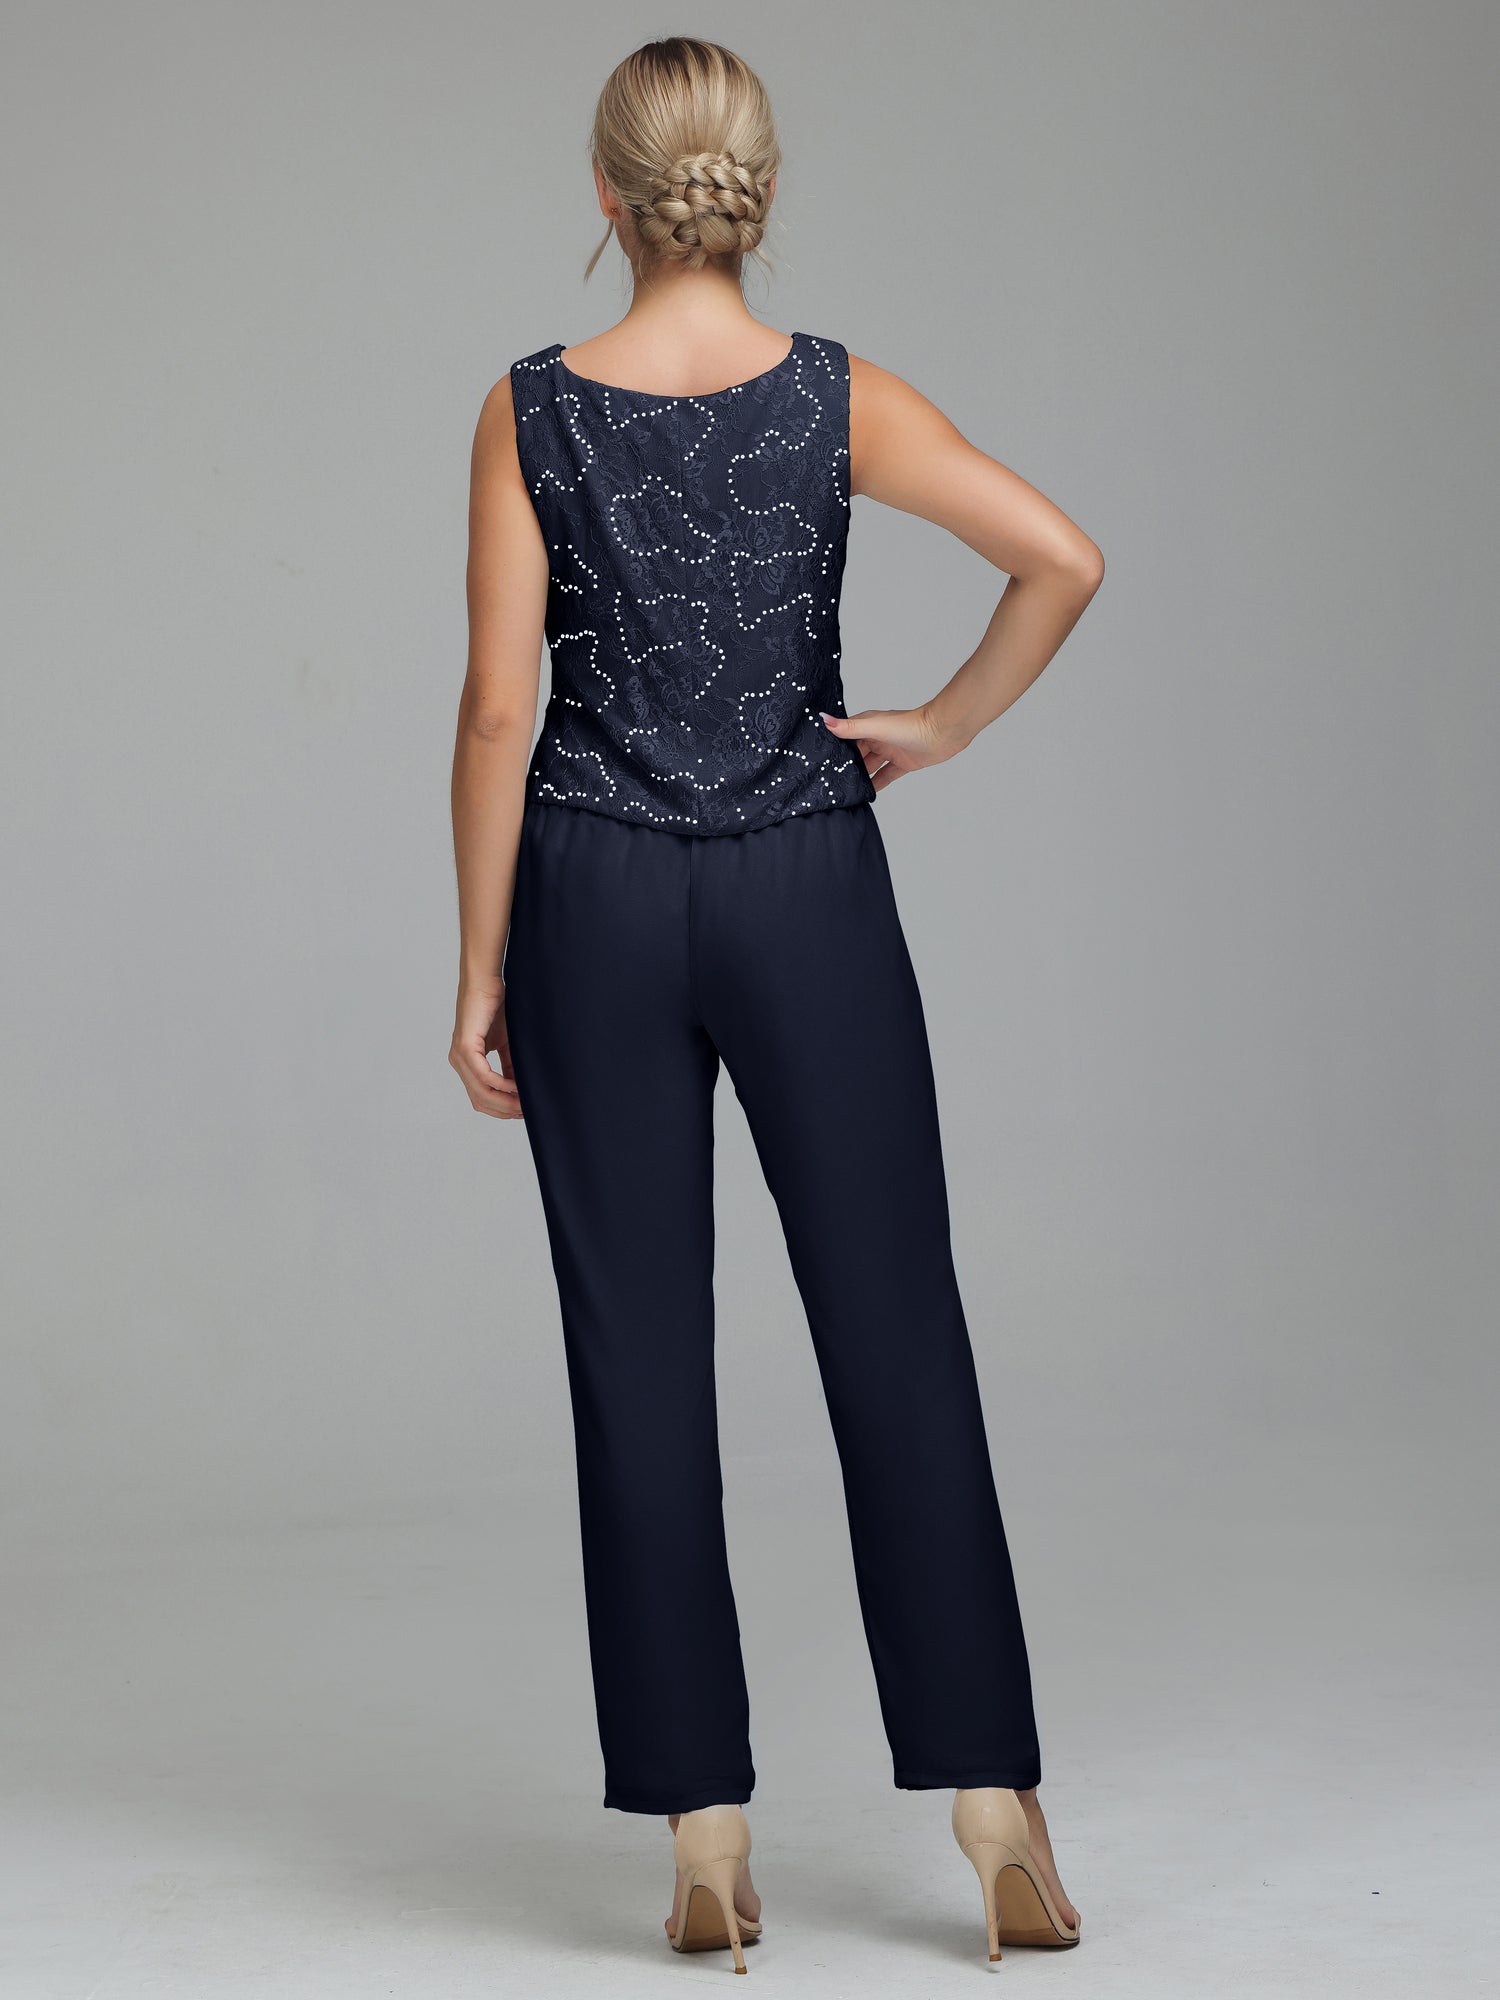 Plus Size Navy Blue Mother Of The Bride Pant Suit With Long Sleeve